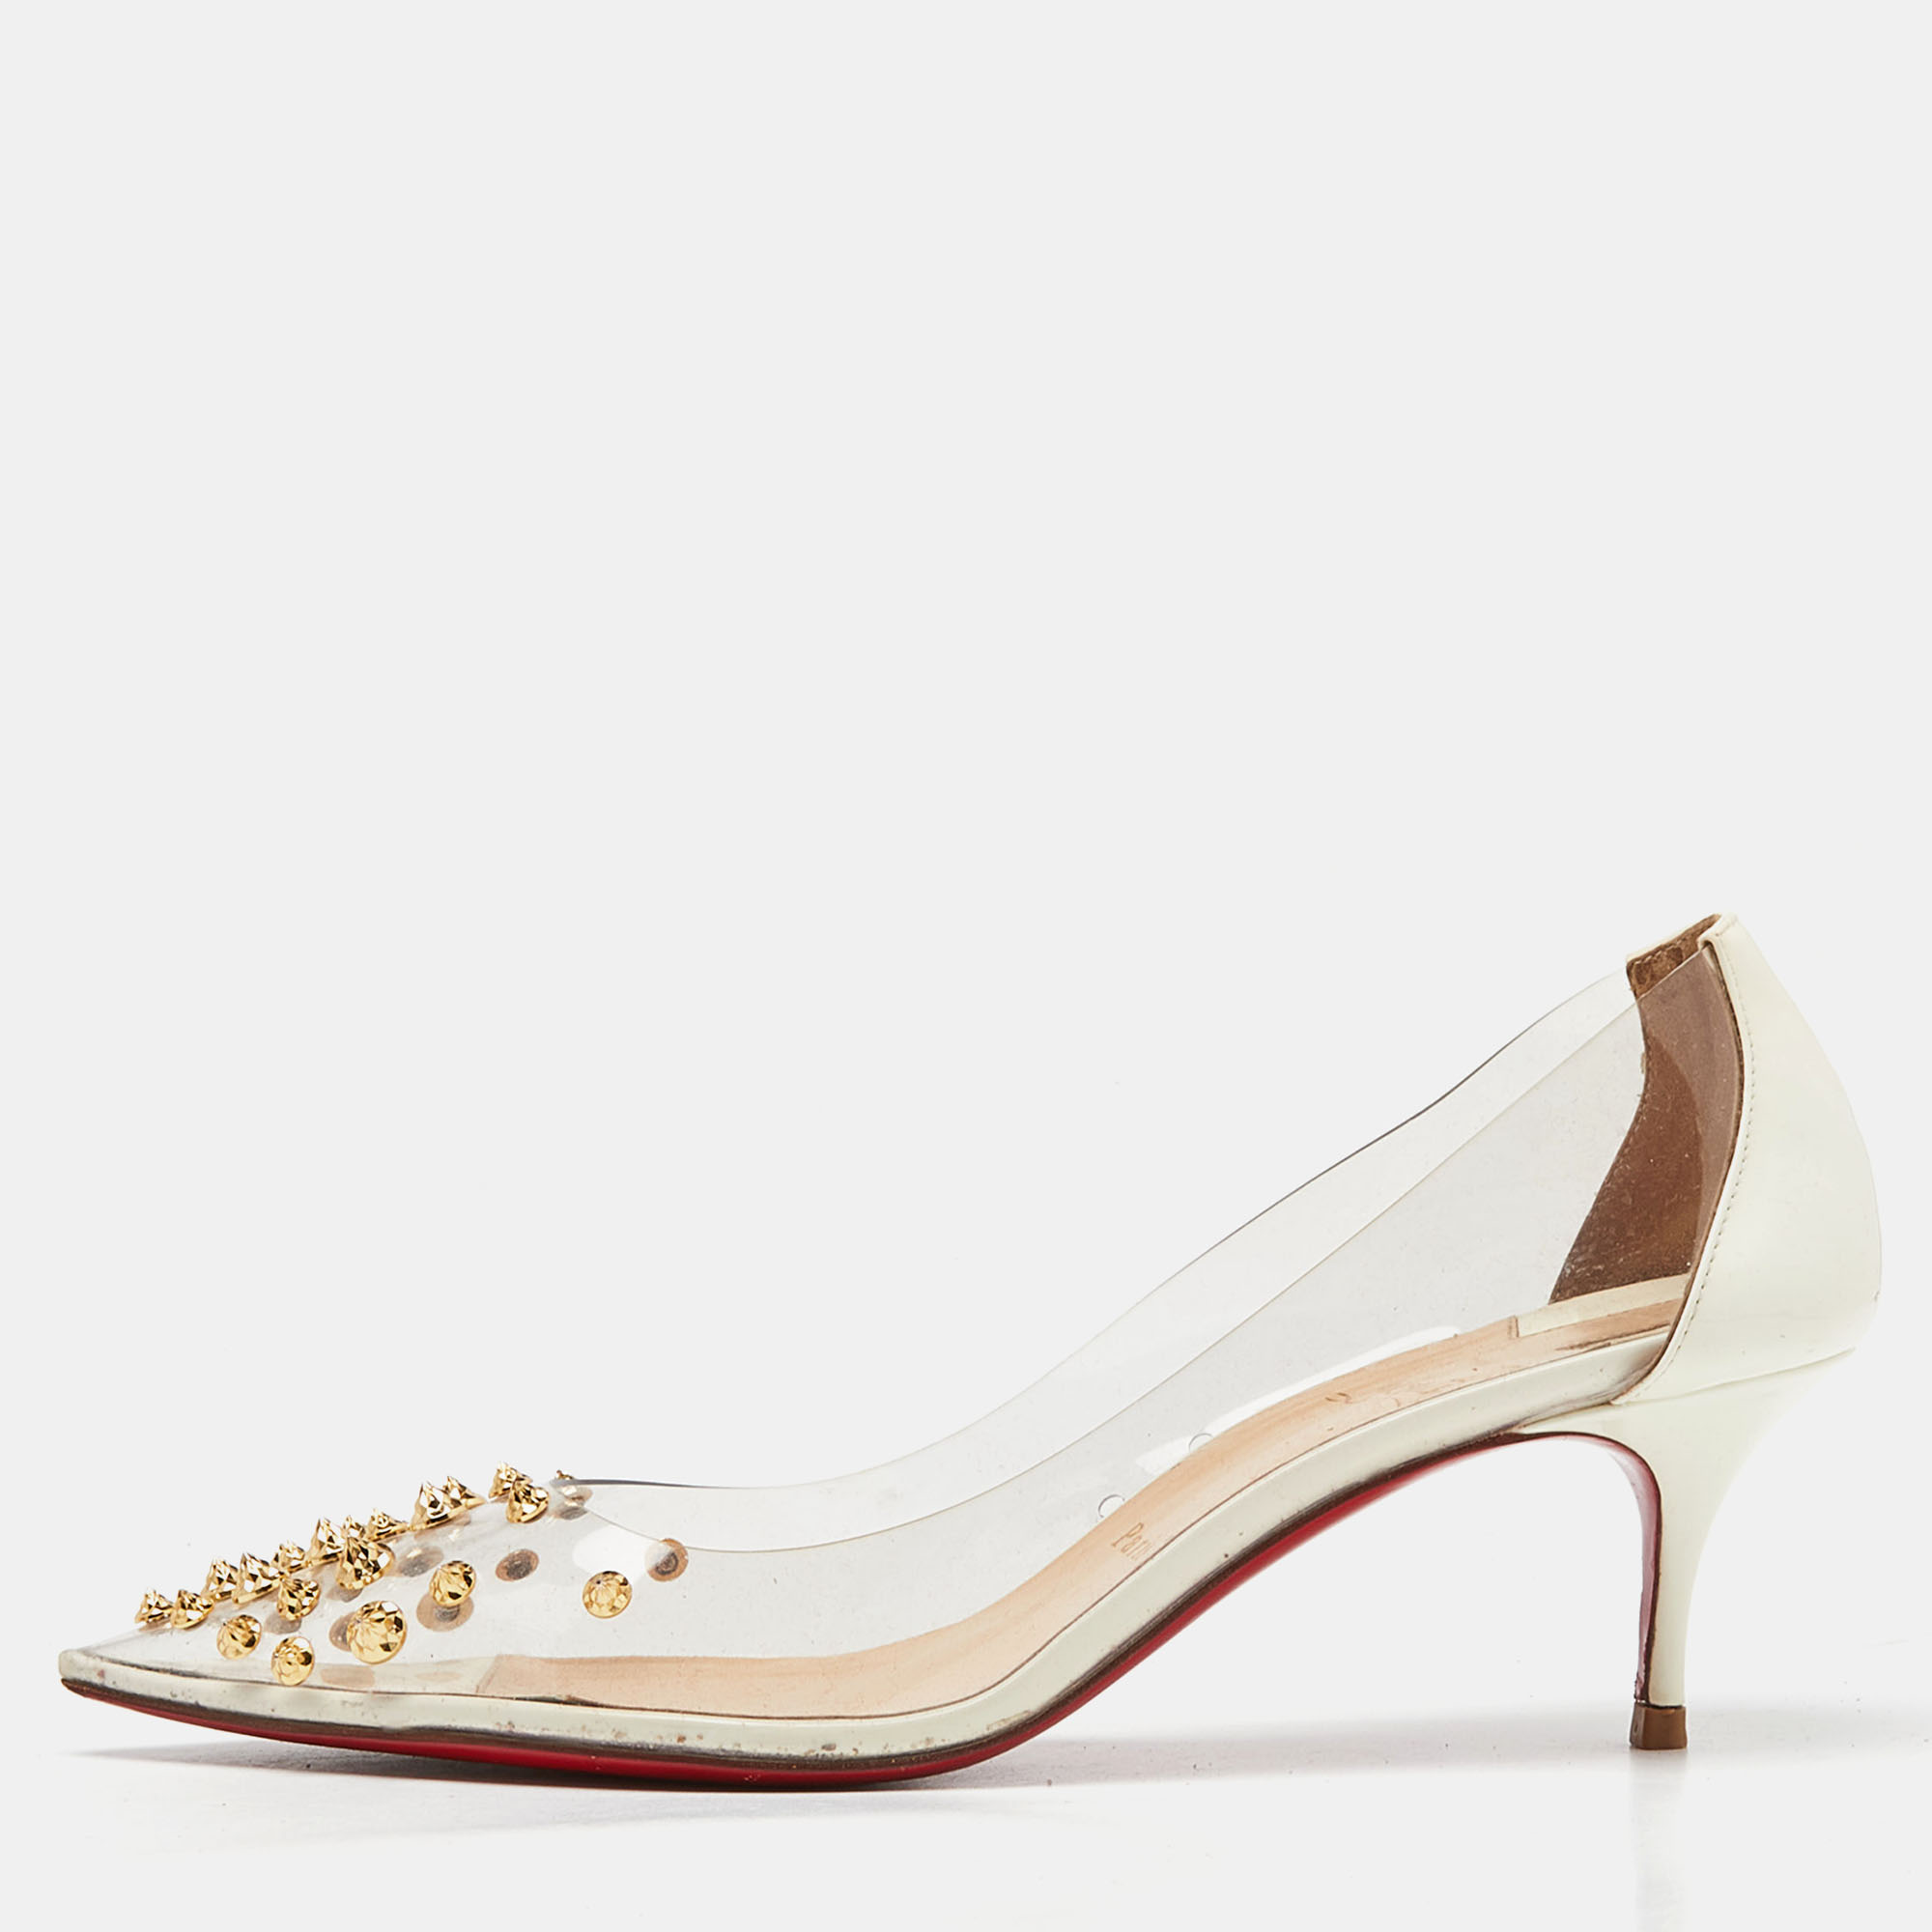 Pre-owned Christian Louboutin White Patent Leather And Pvc Collaclou Spiked Pointed Toe Pumps Size 40